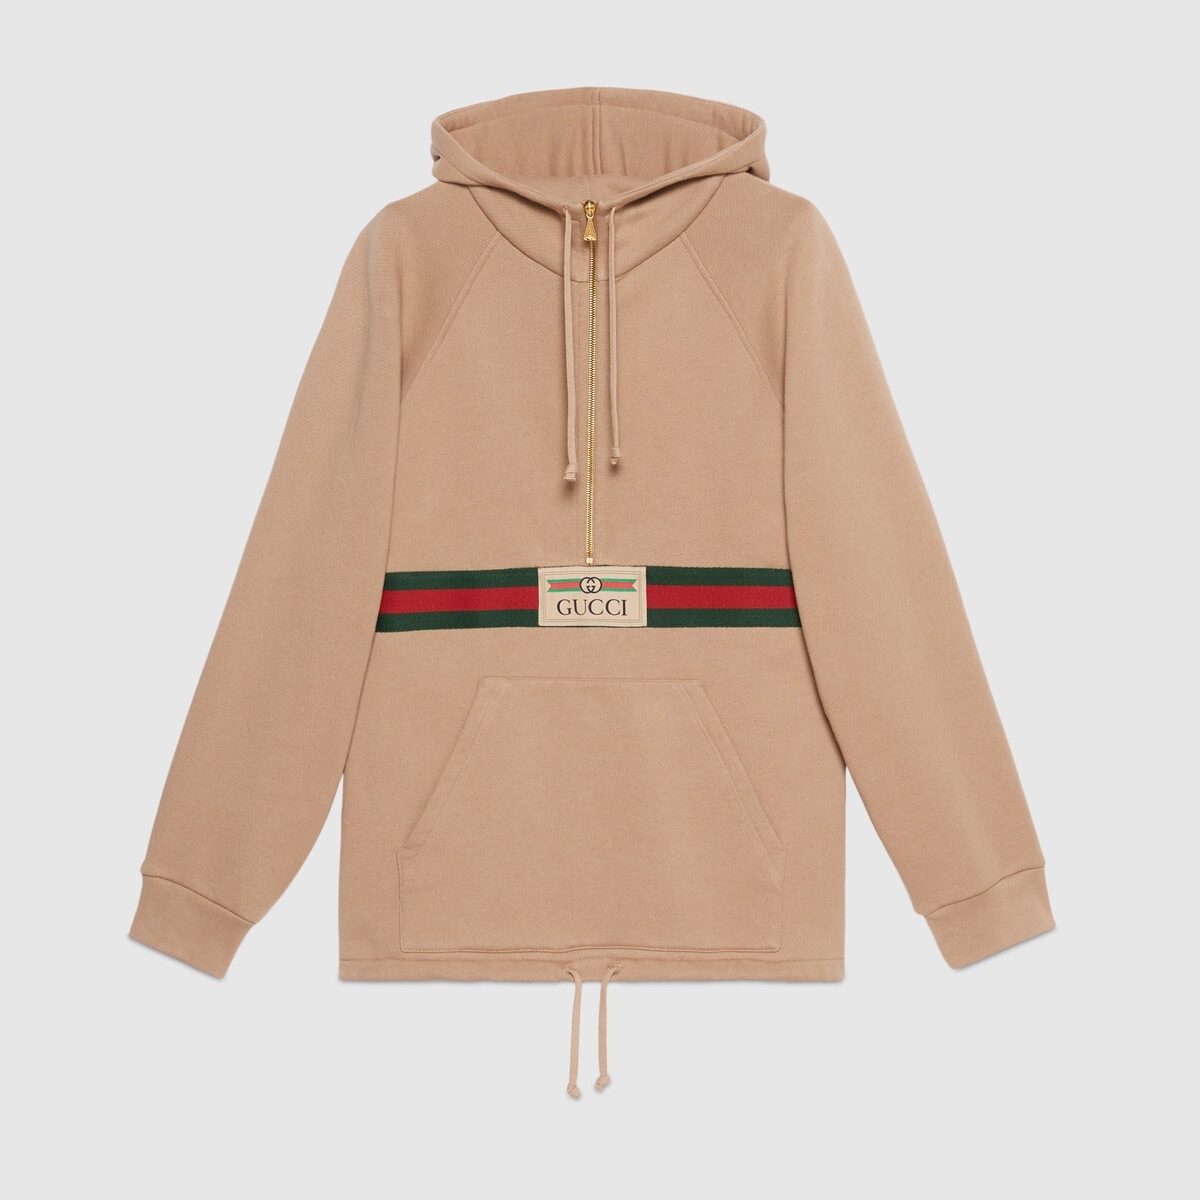 Sweatshirt with Web and Gucci label - 1